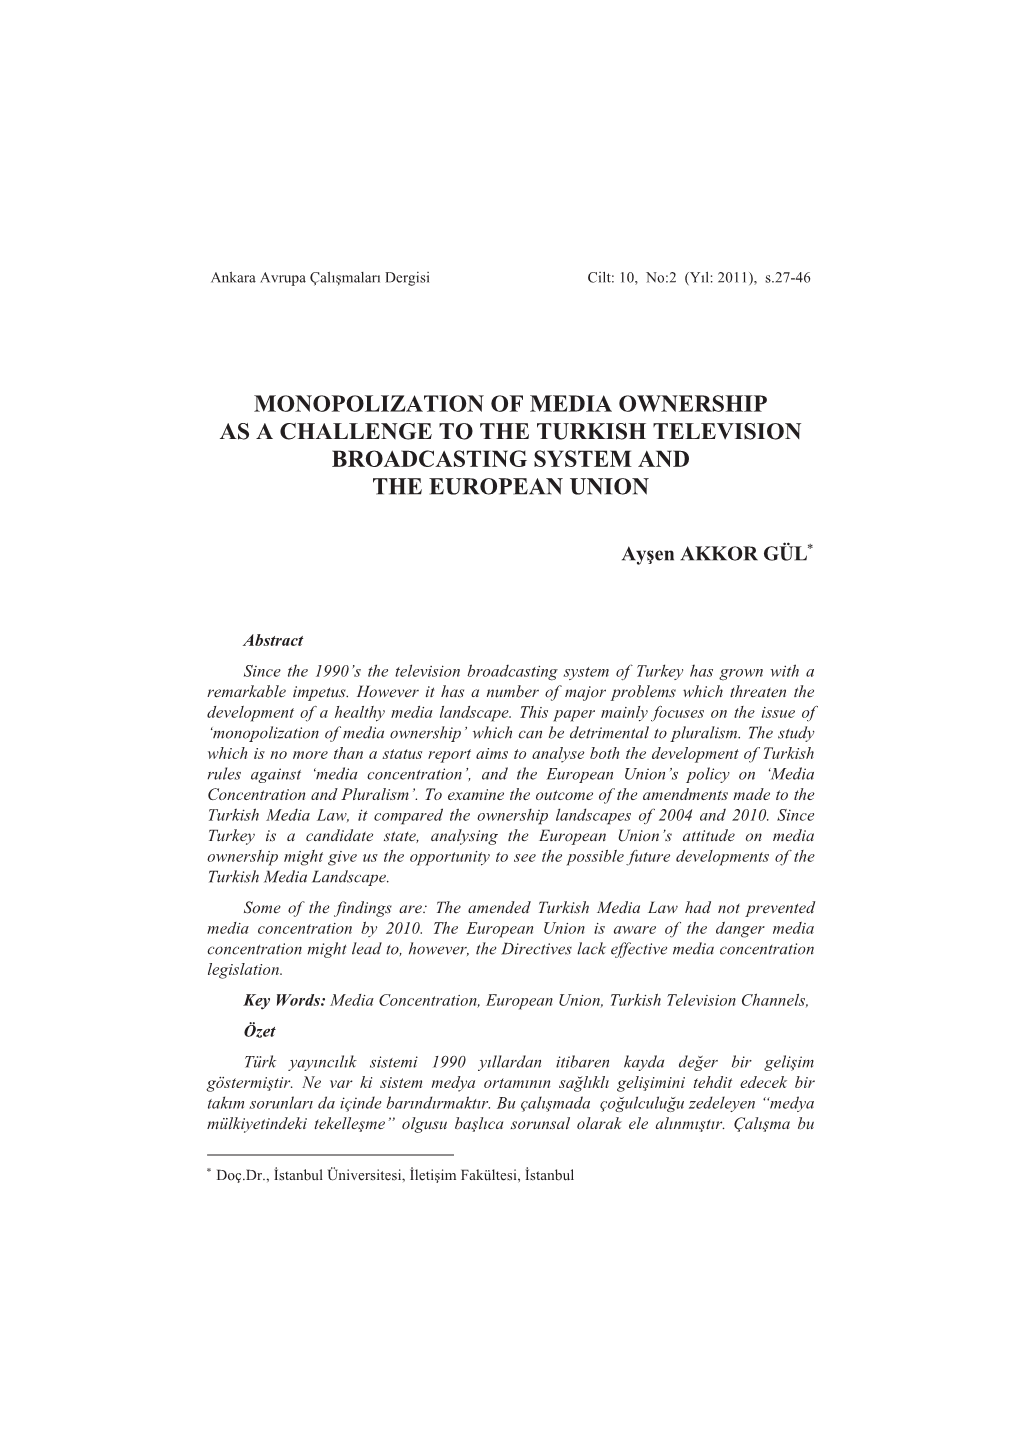 Monopolization of Media Ownership As a Challenge to the Turkish Television Broadcasting System and the European Union